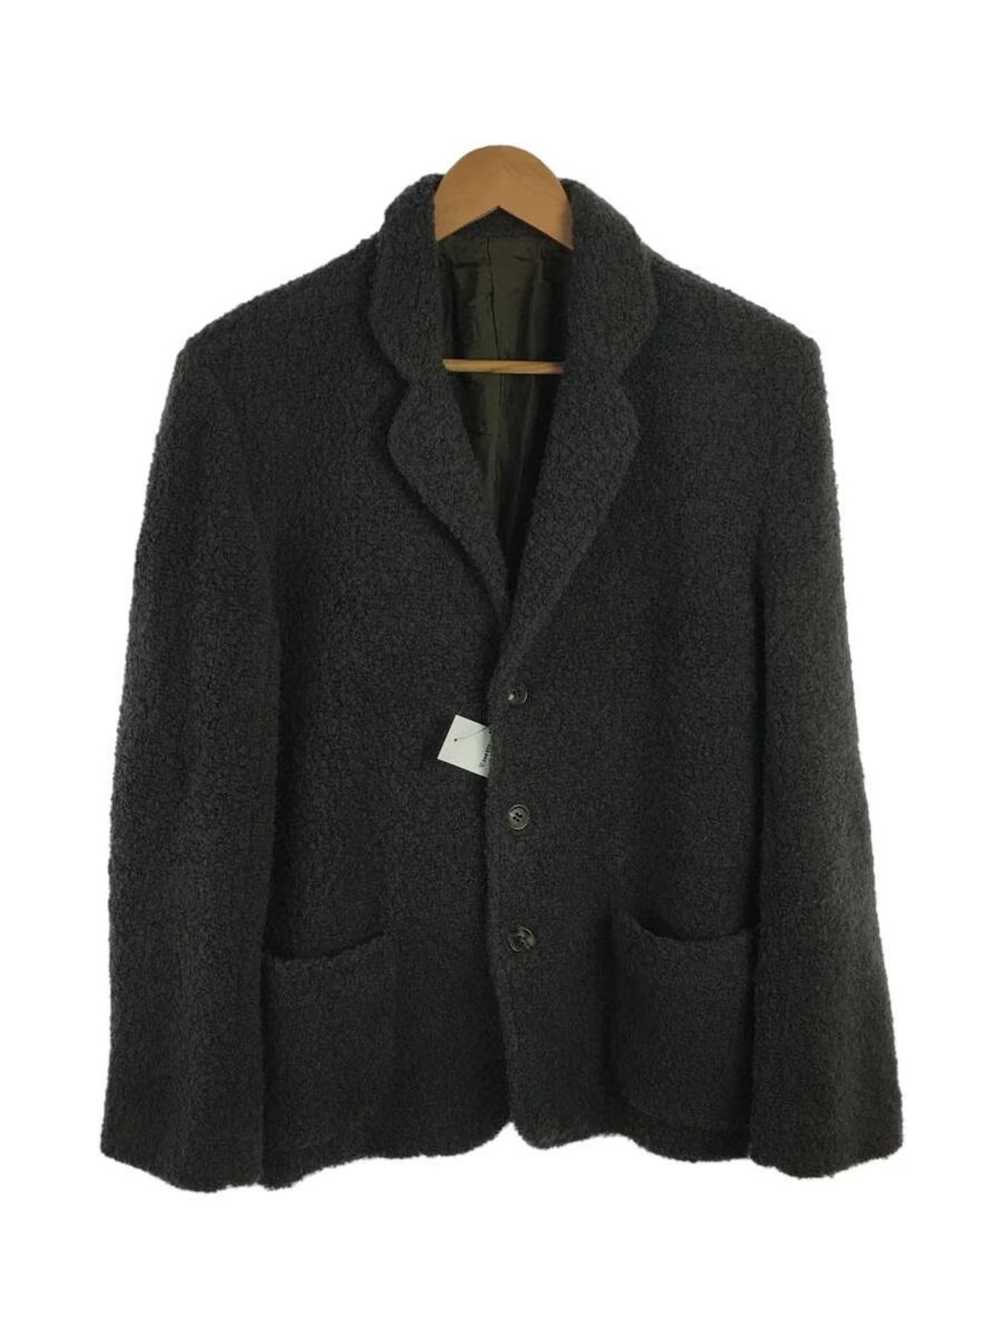 Undercover AW01 "D.A.V.F." Wool Blazer - image 1